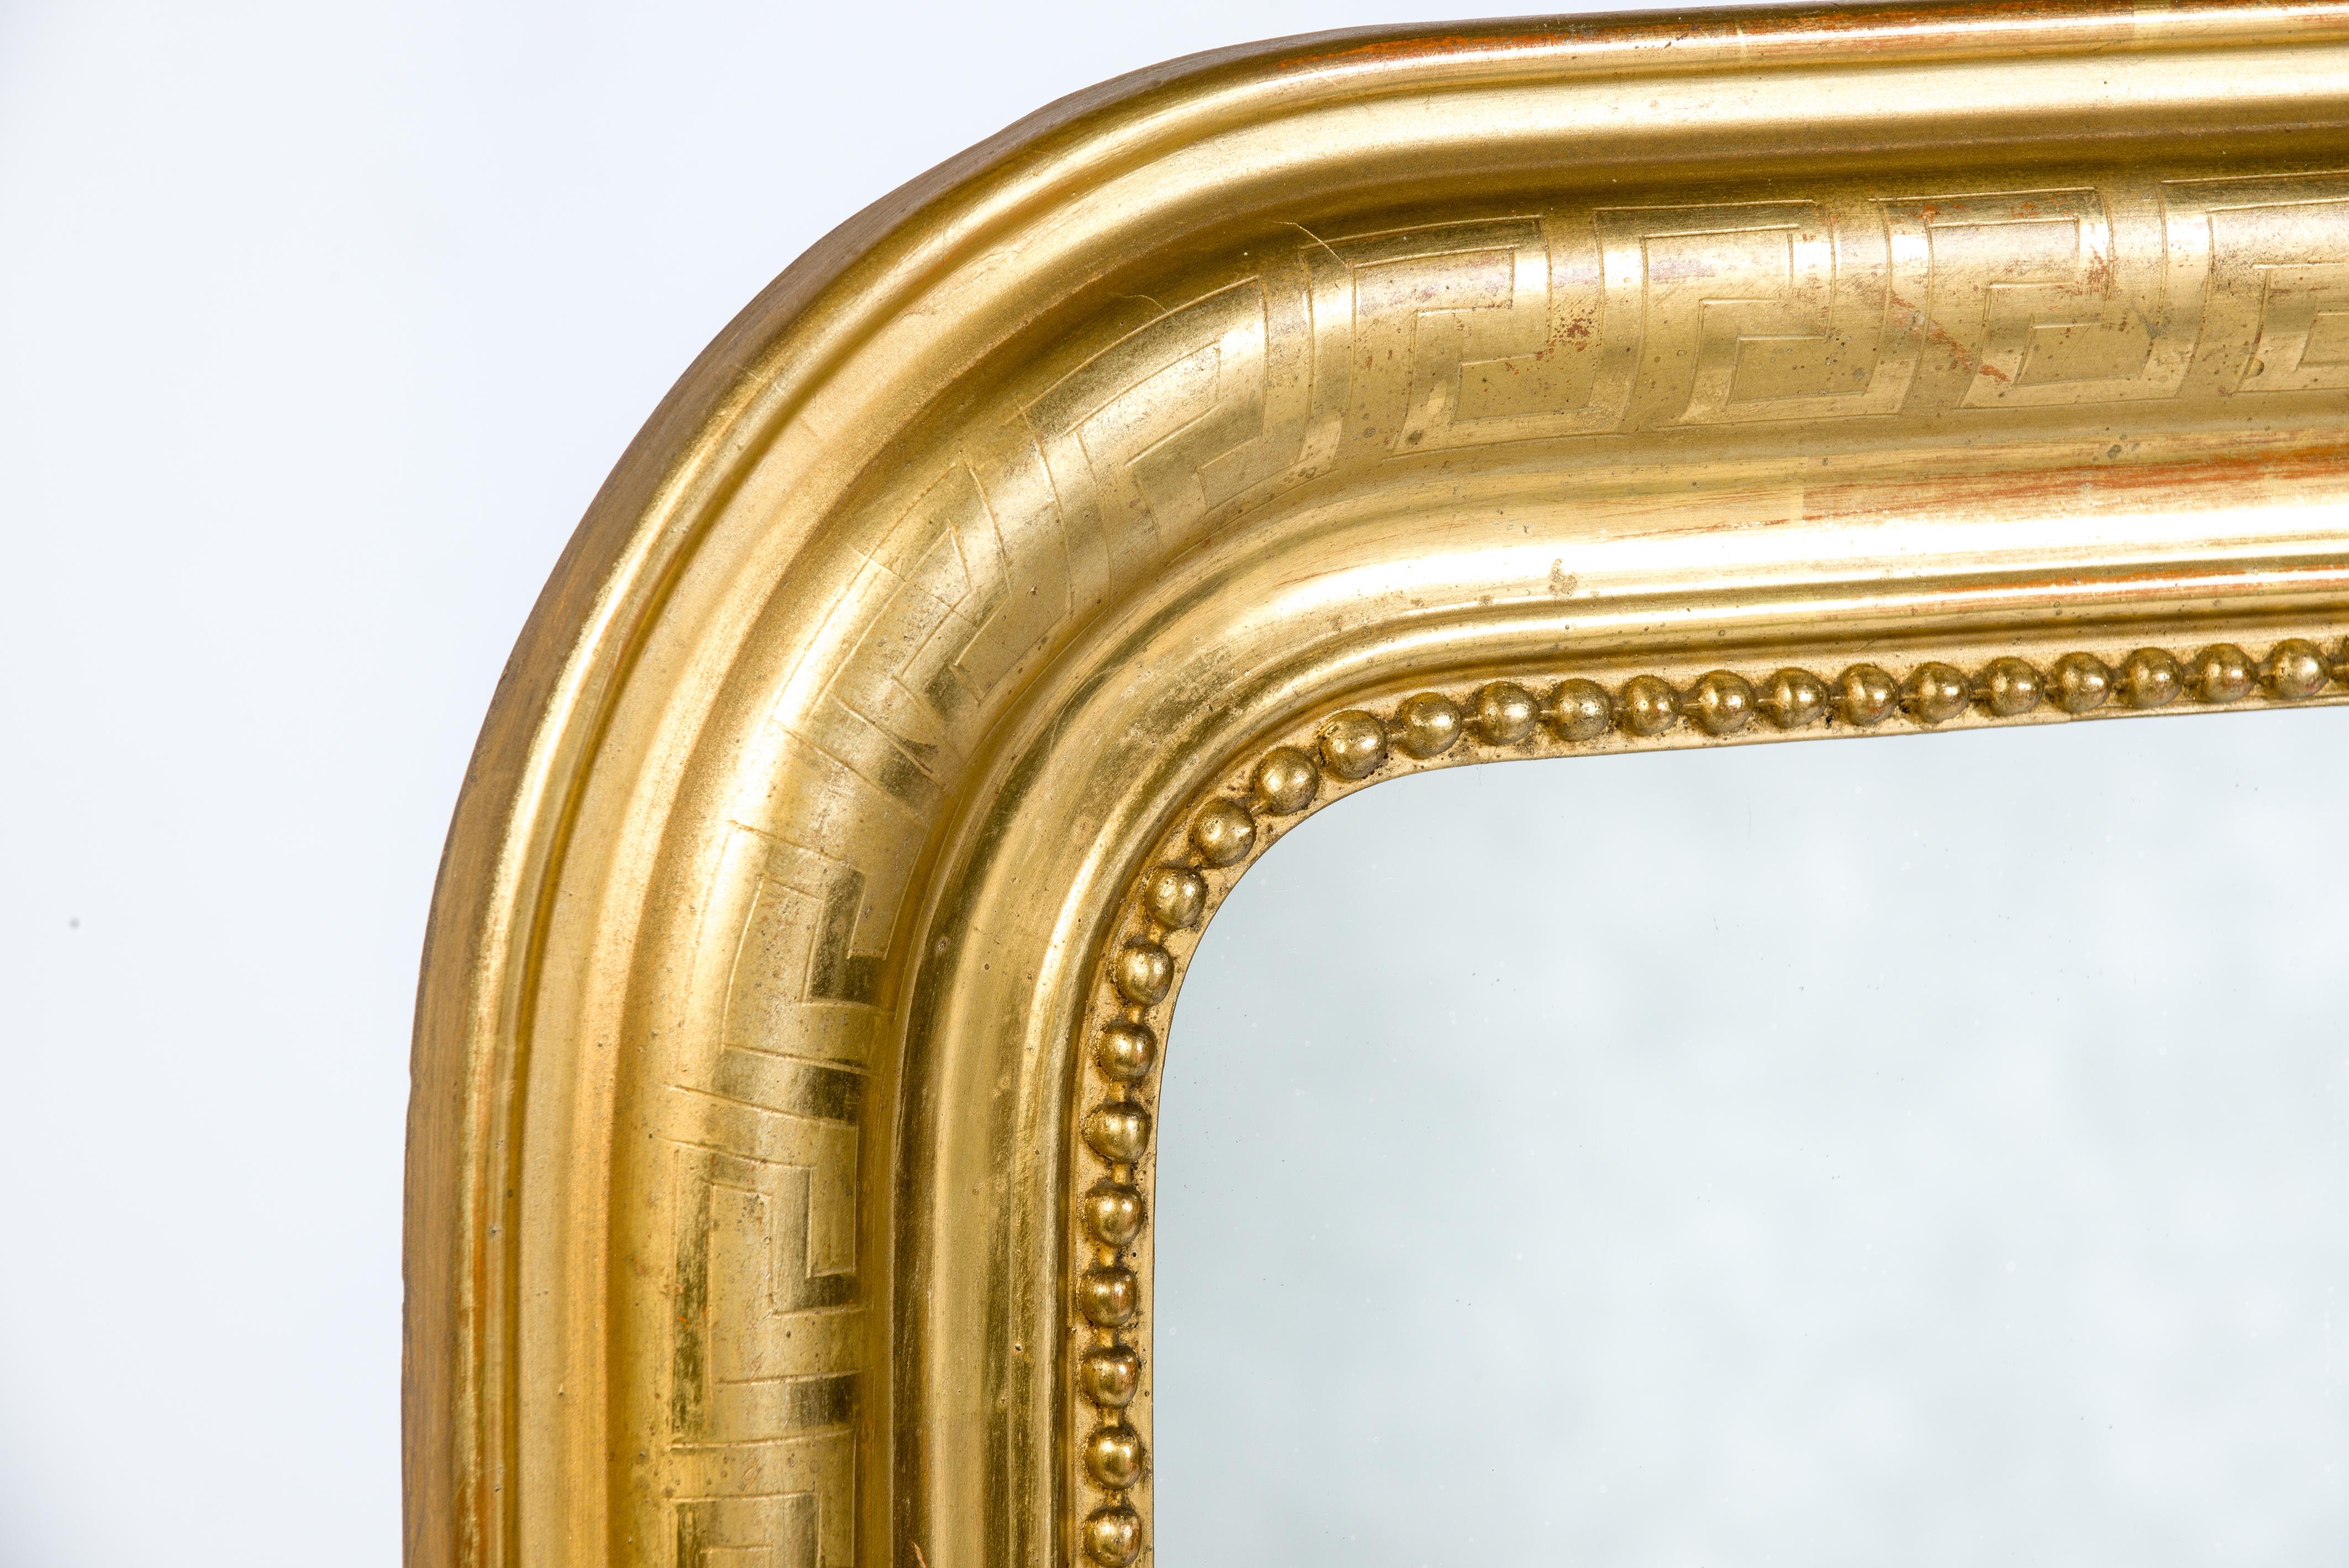 A beautiful gold leaf gilt French mirror. It has the upper rounded corners typical for the Louis Philippe style. The mirror frame has an elegant pearl beading surrounding the glass. The most elevated part Is engraved with a Classic geometric Greek